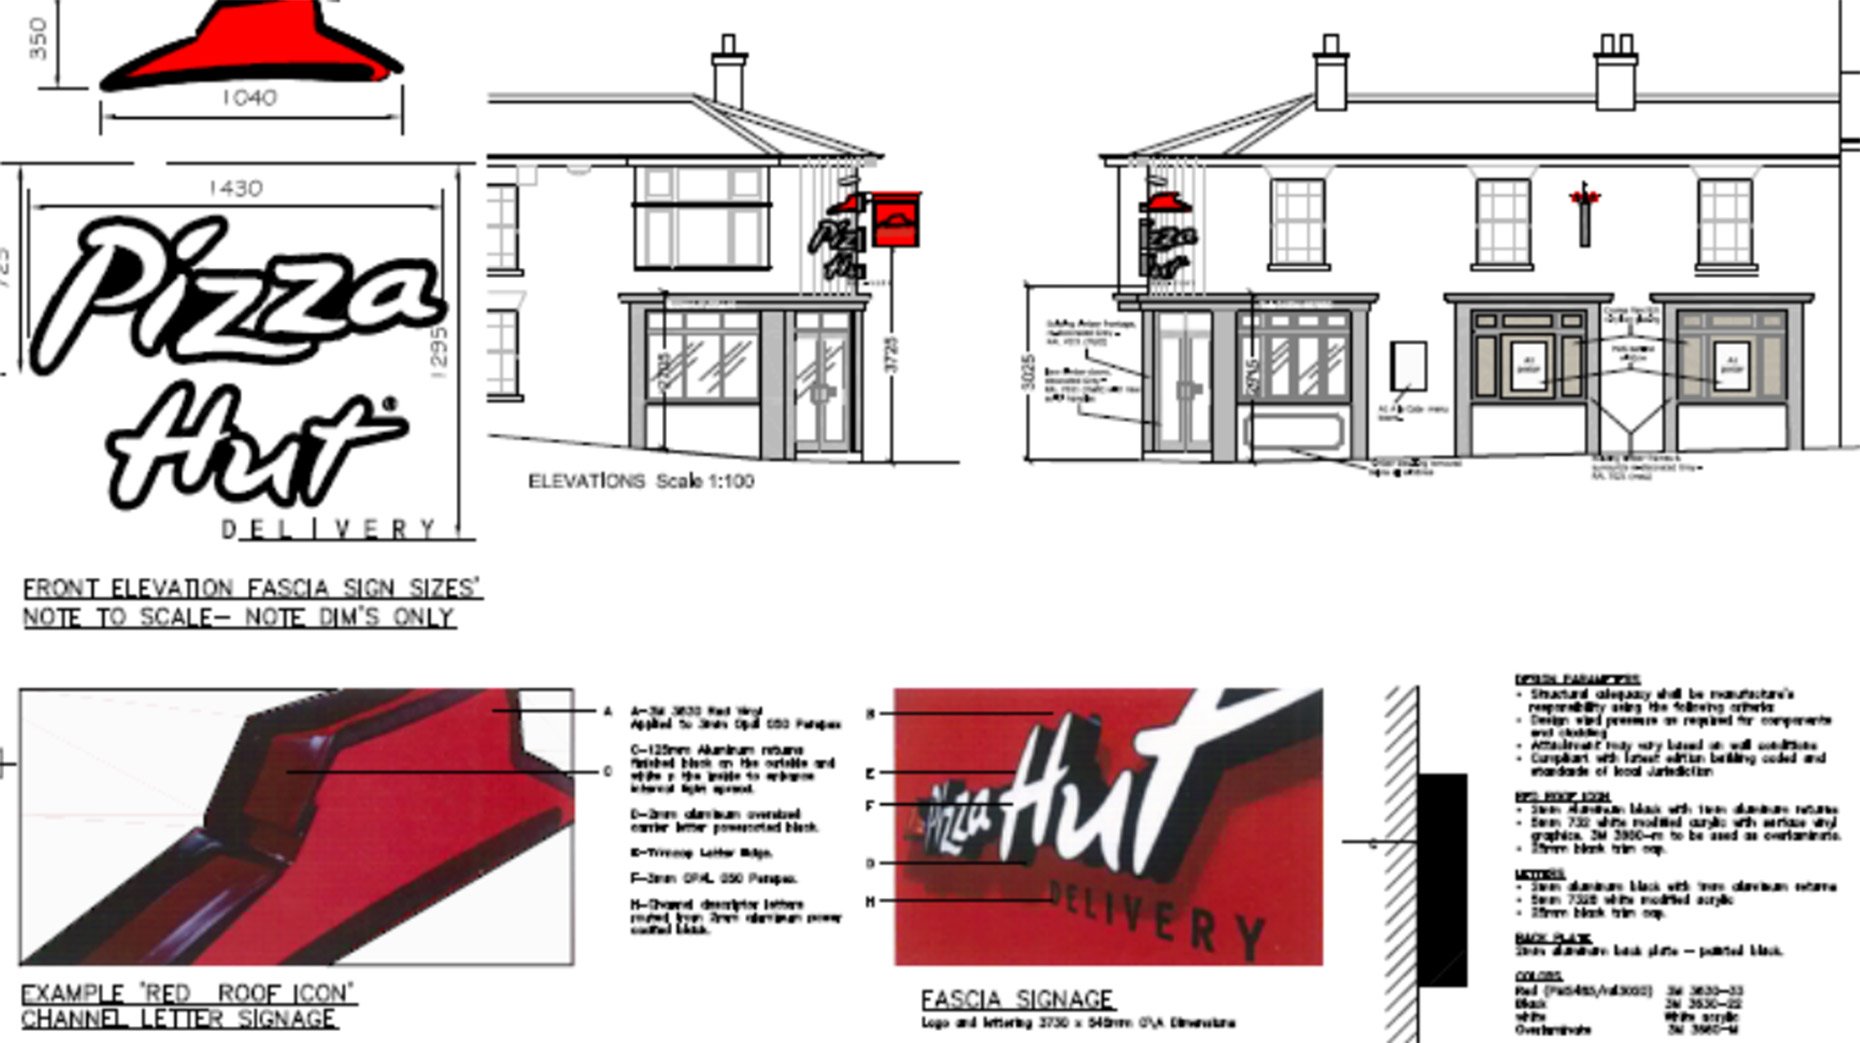 The designs submitted for the new Pizza Hut Delivery outlet. 